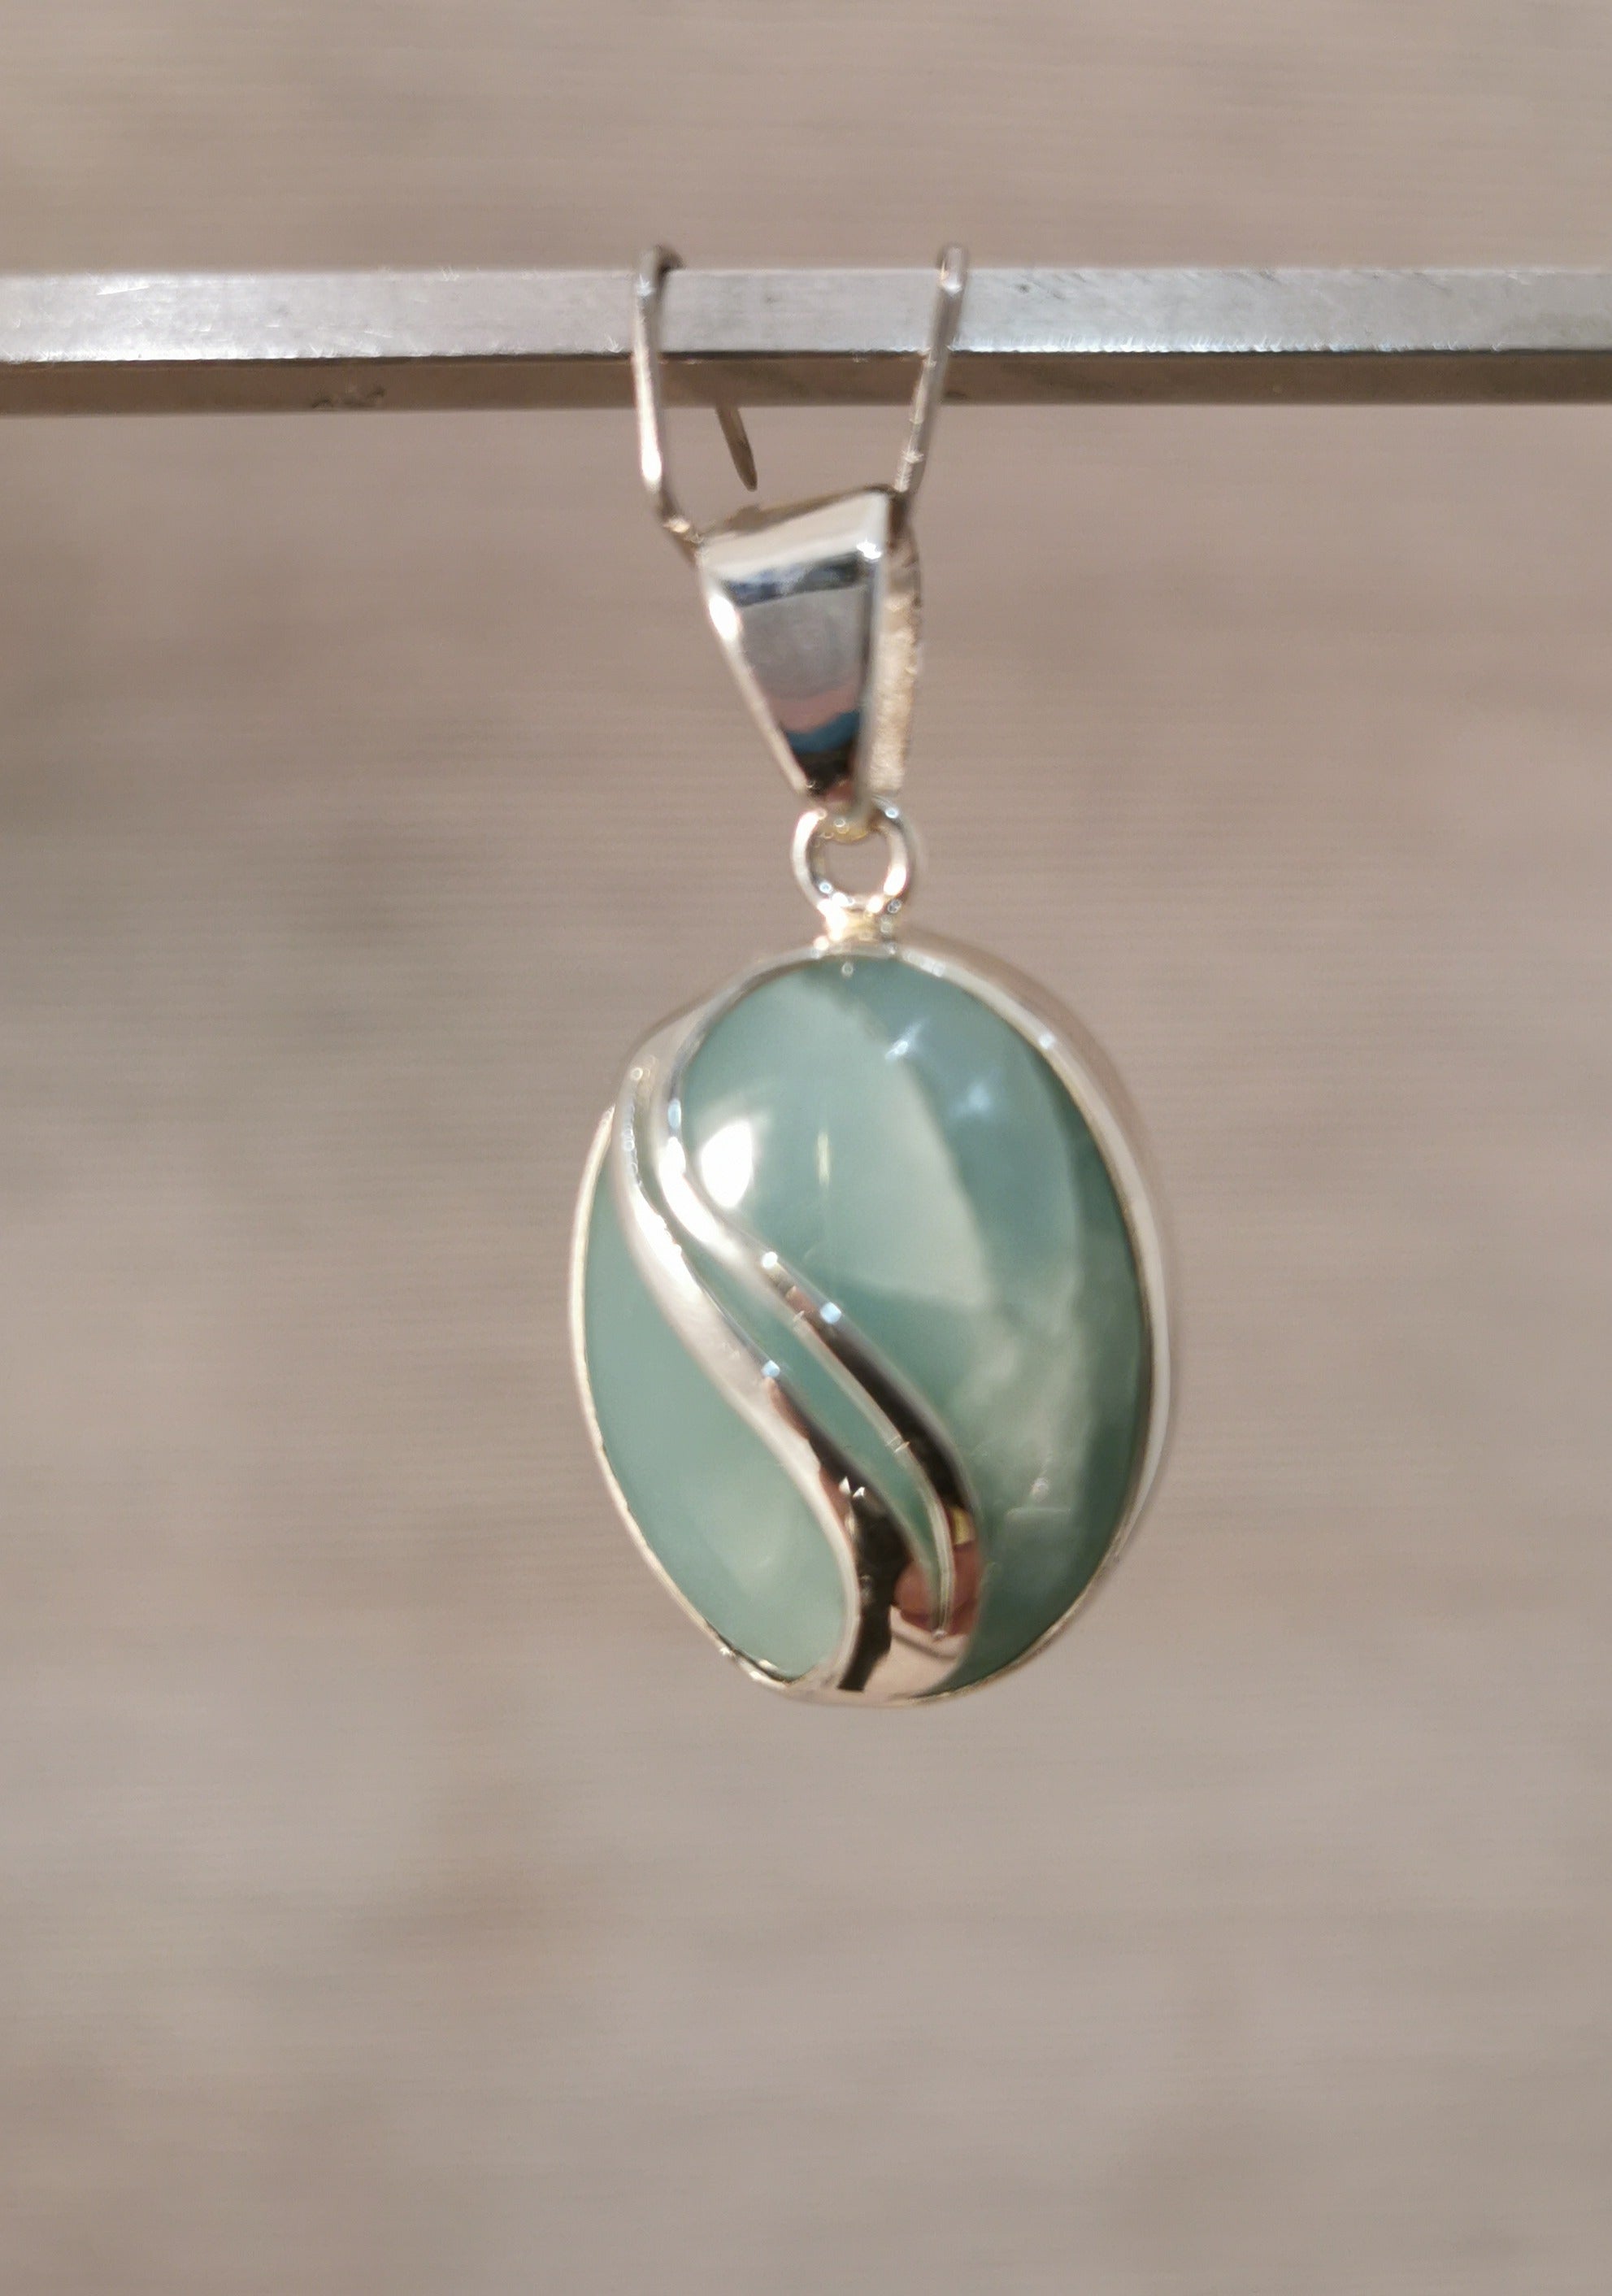 Aquamarine Oval Pendant - 925 Sterling Silver with Decorative Wave Pattern